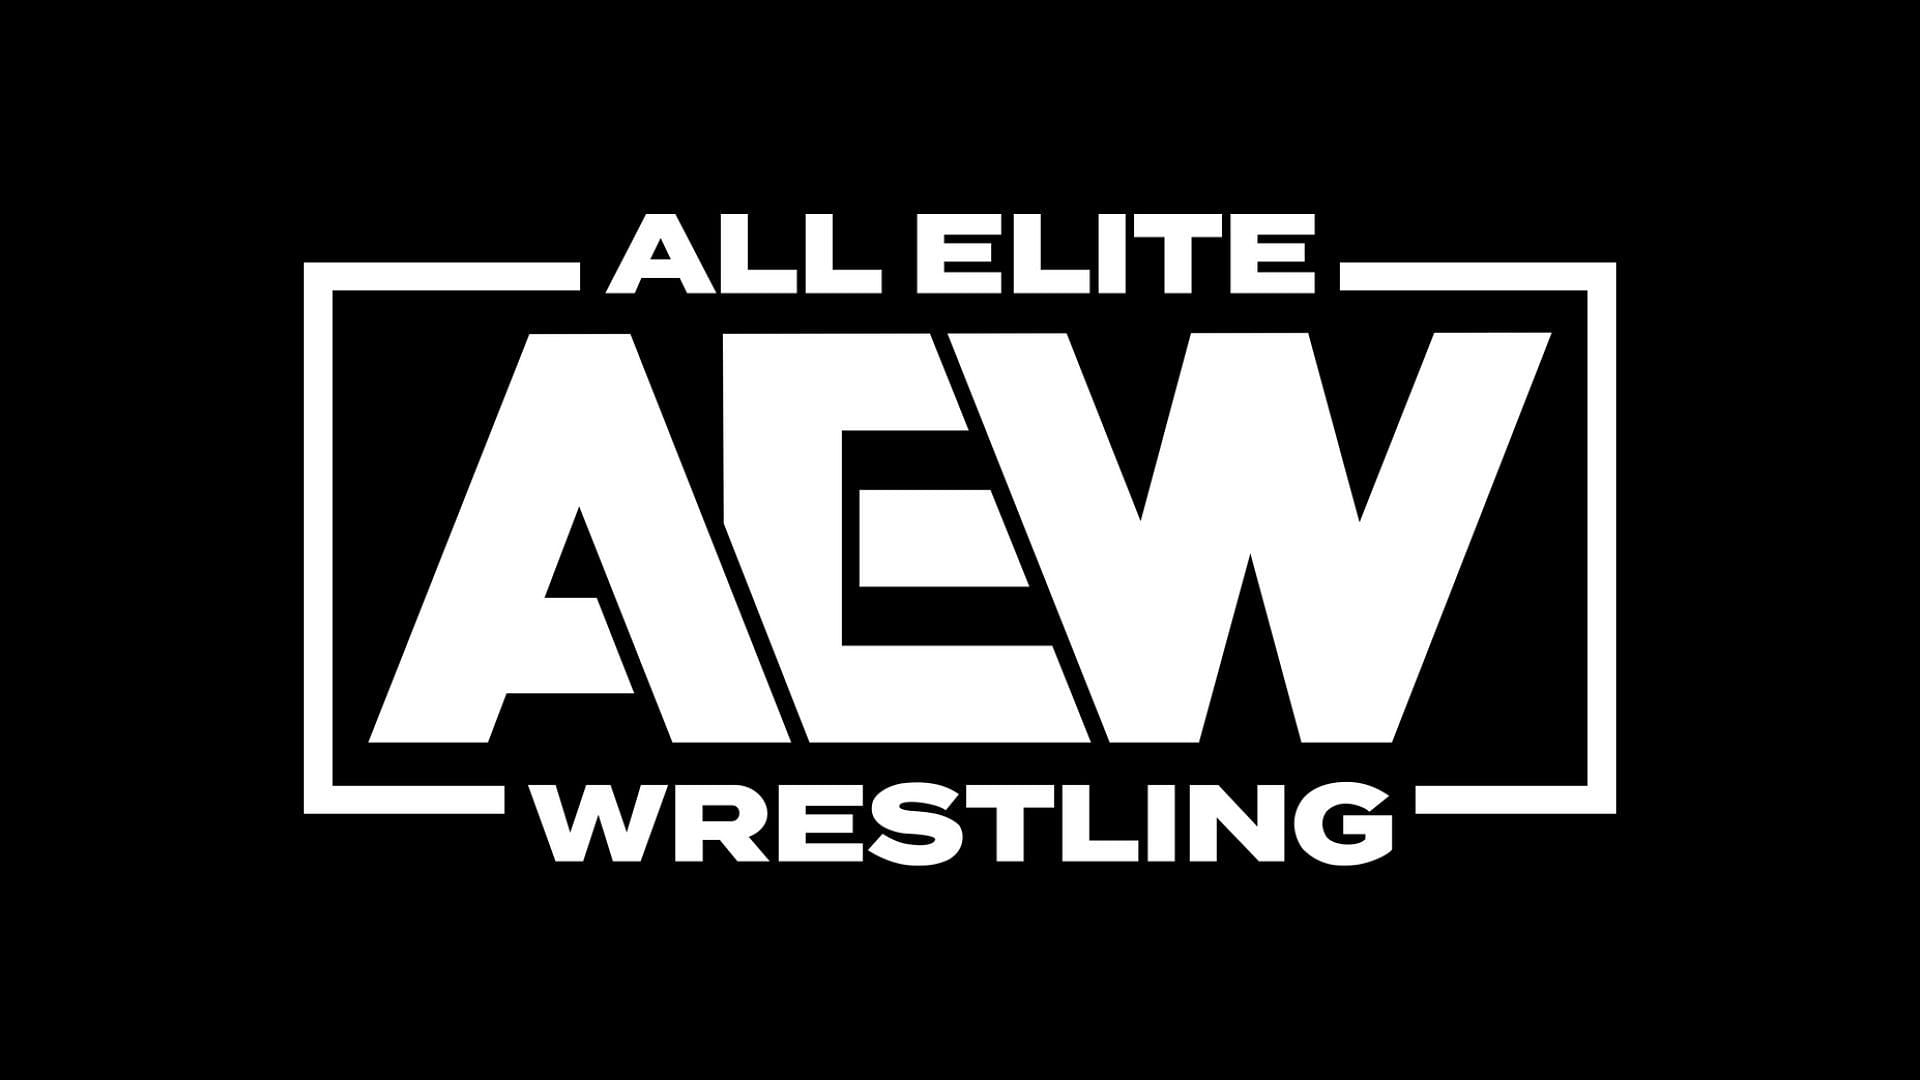 Could this major star end his career signed to AEW?